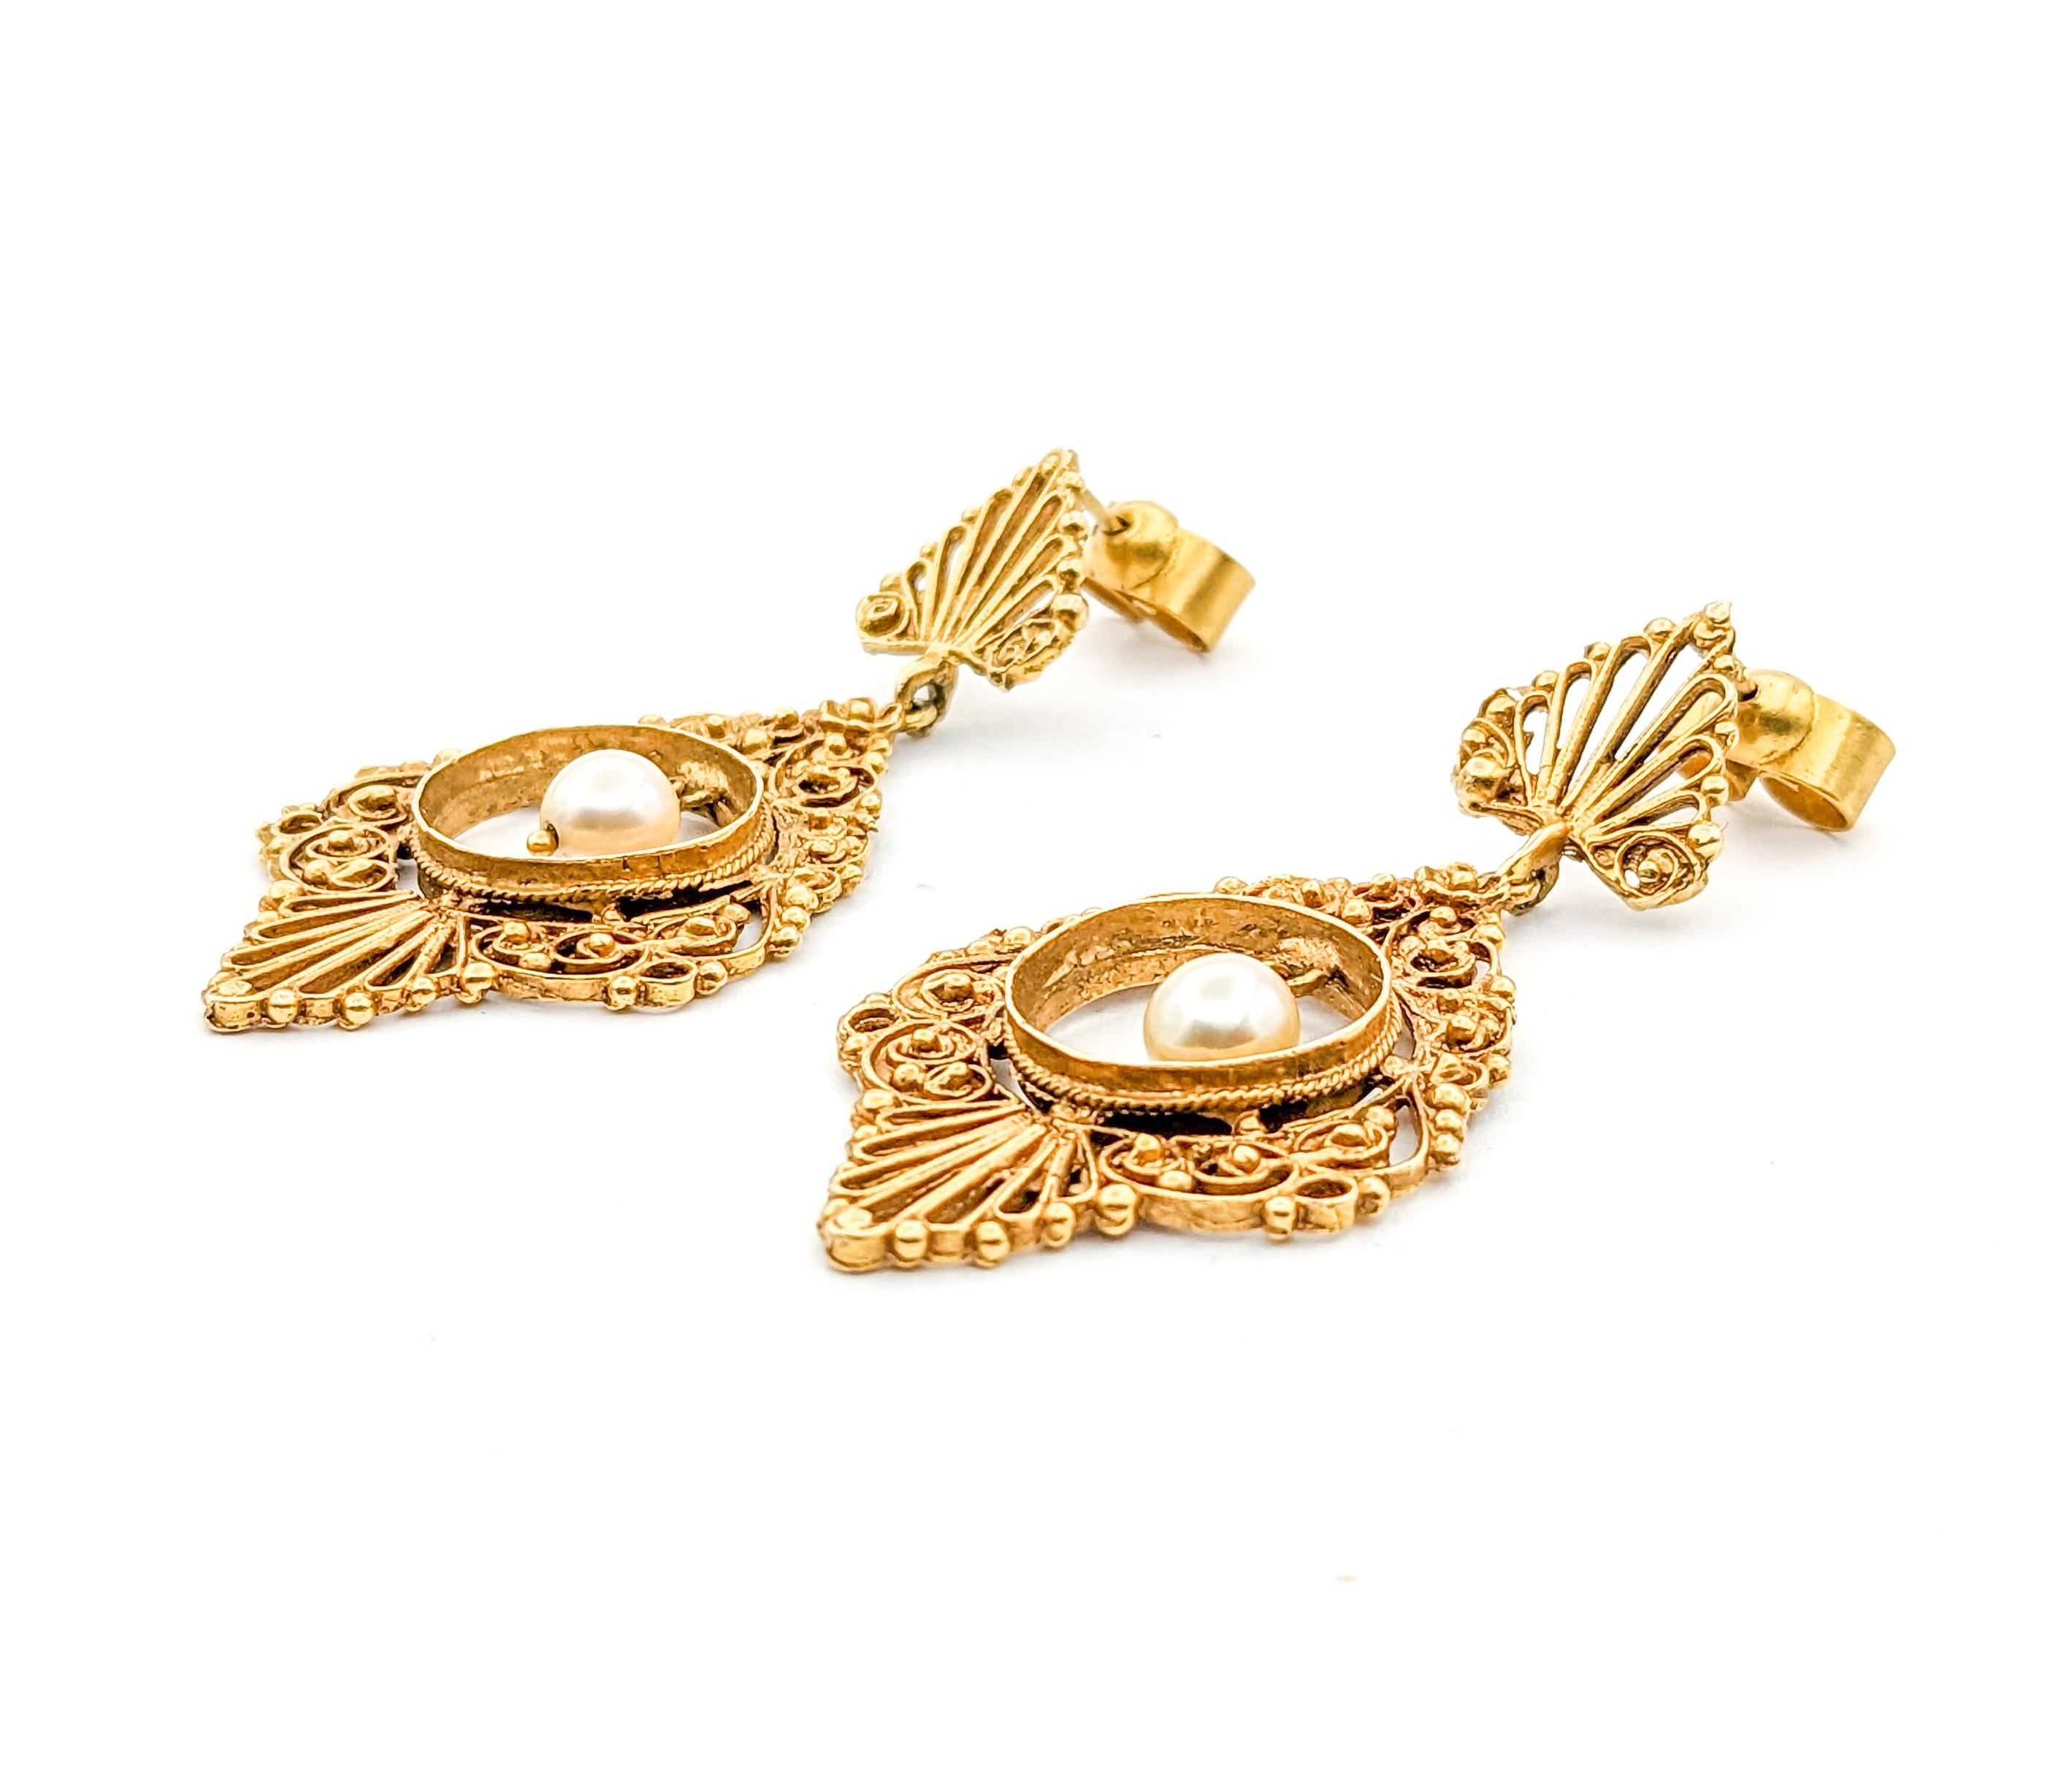 Romantic Vintage Filigree Pearl Drop Earrings in Yellow Gold For Sale 1